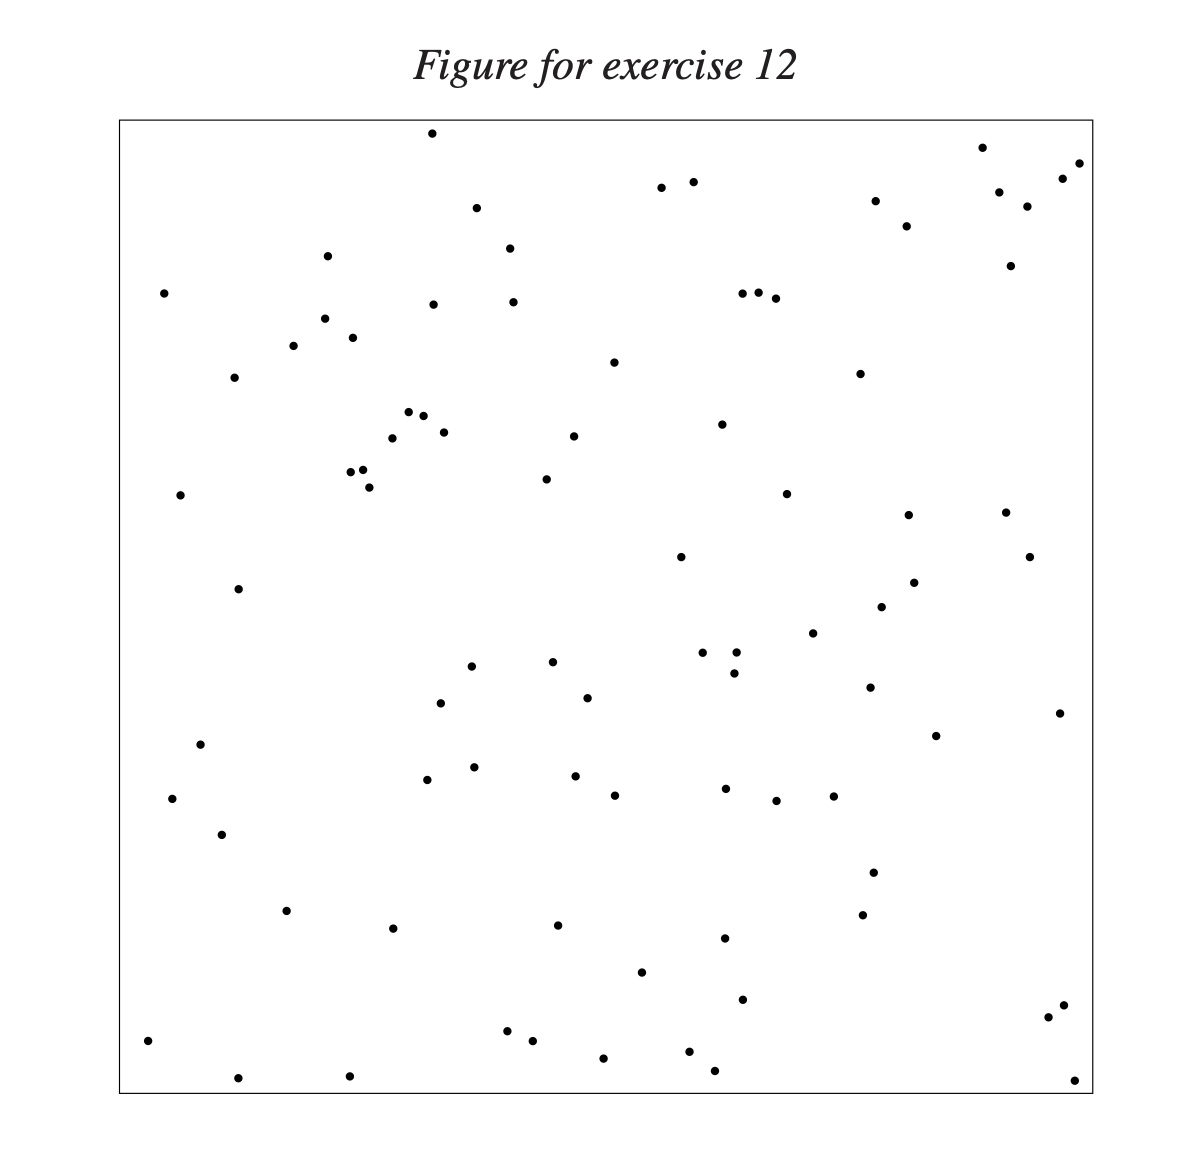 Figure for exercise 12
:
